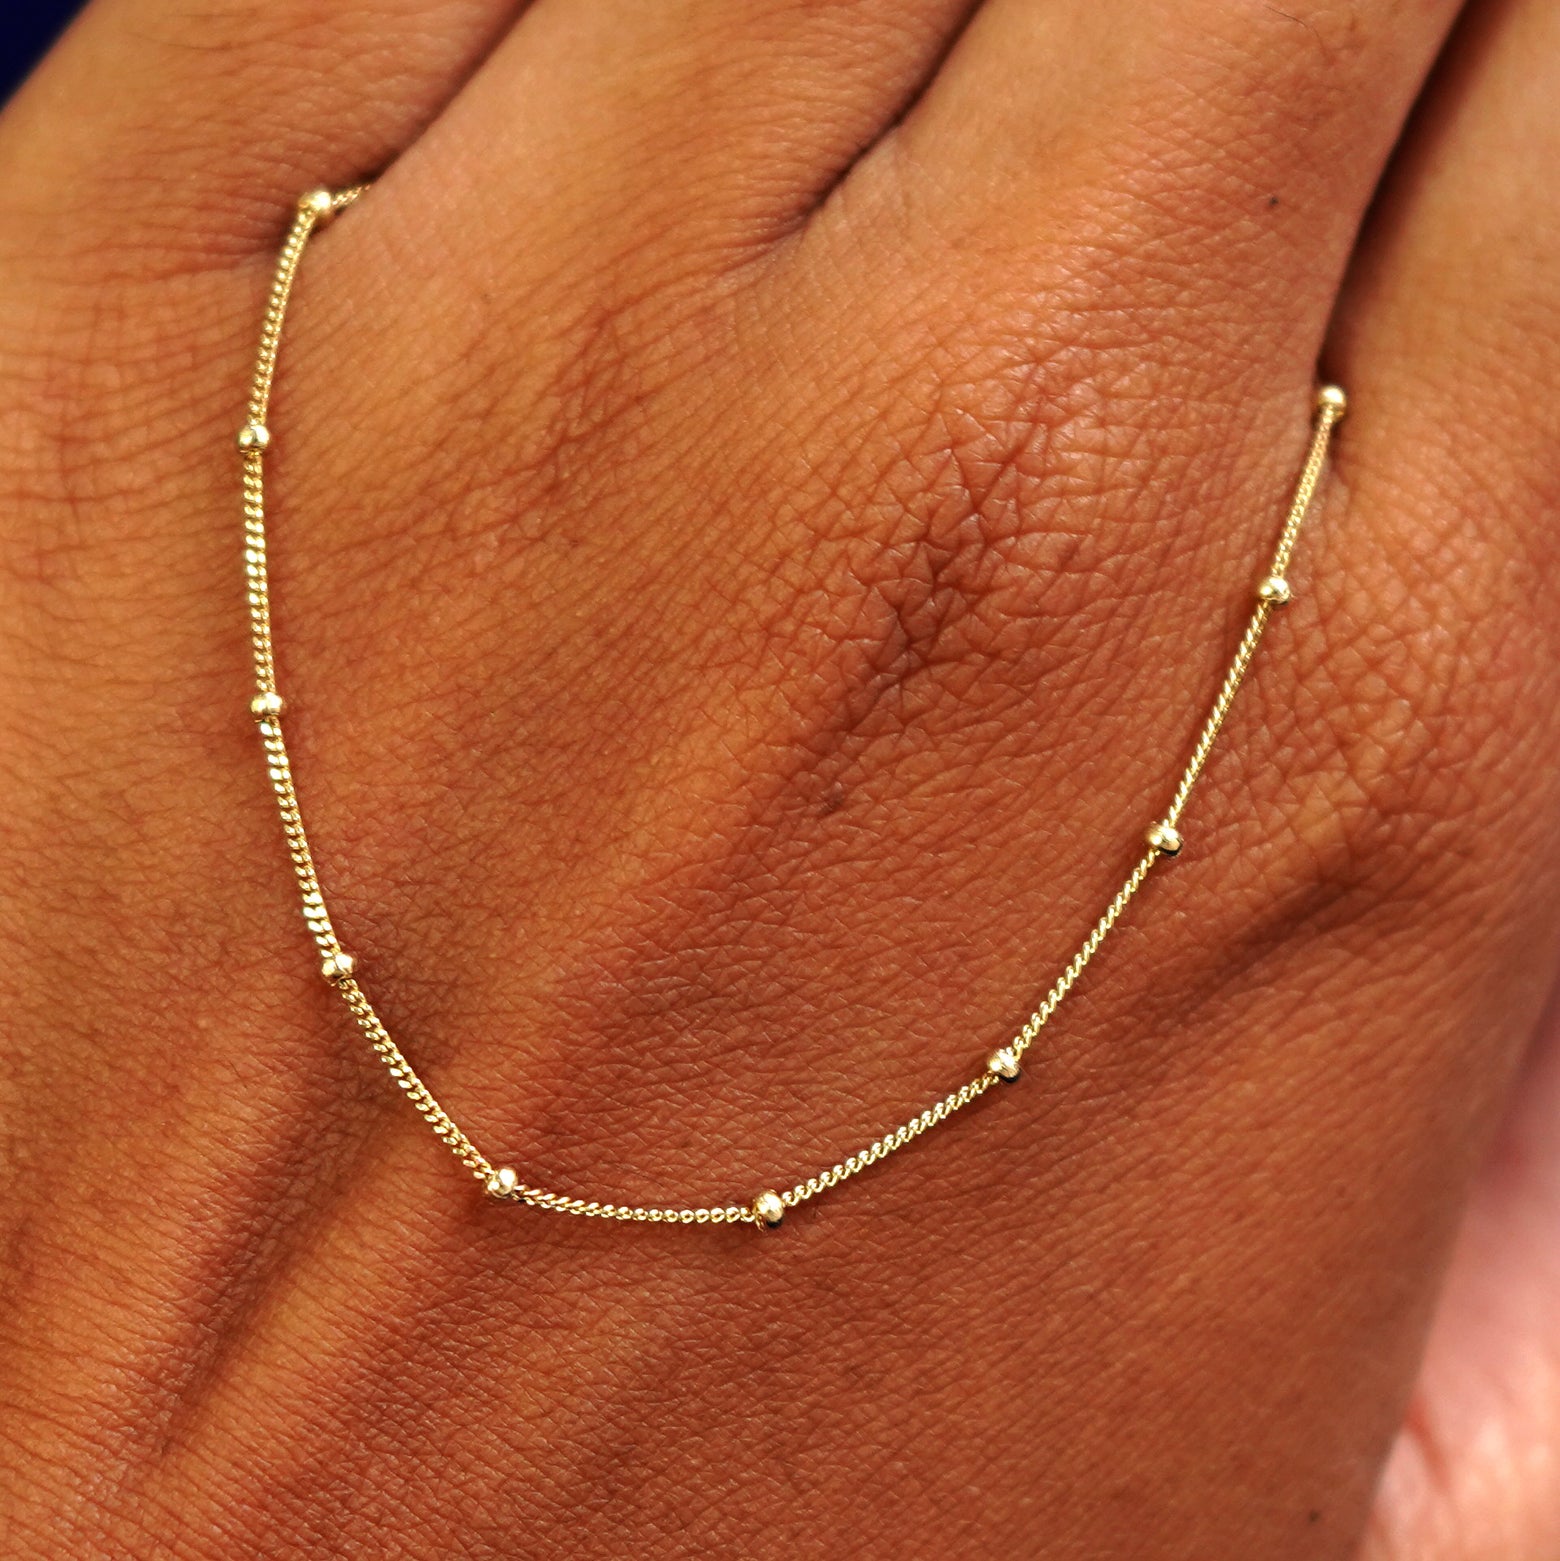 A solid gold Beaded Essential Anklet resting on the back of a model's hand